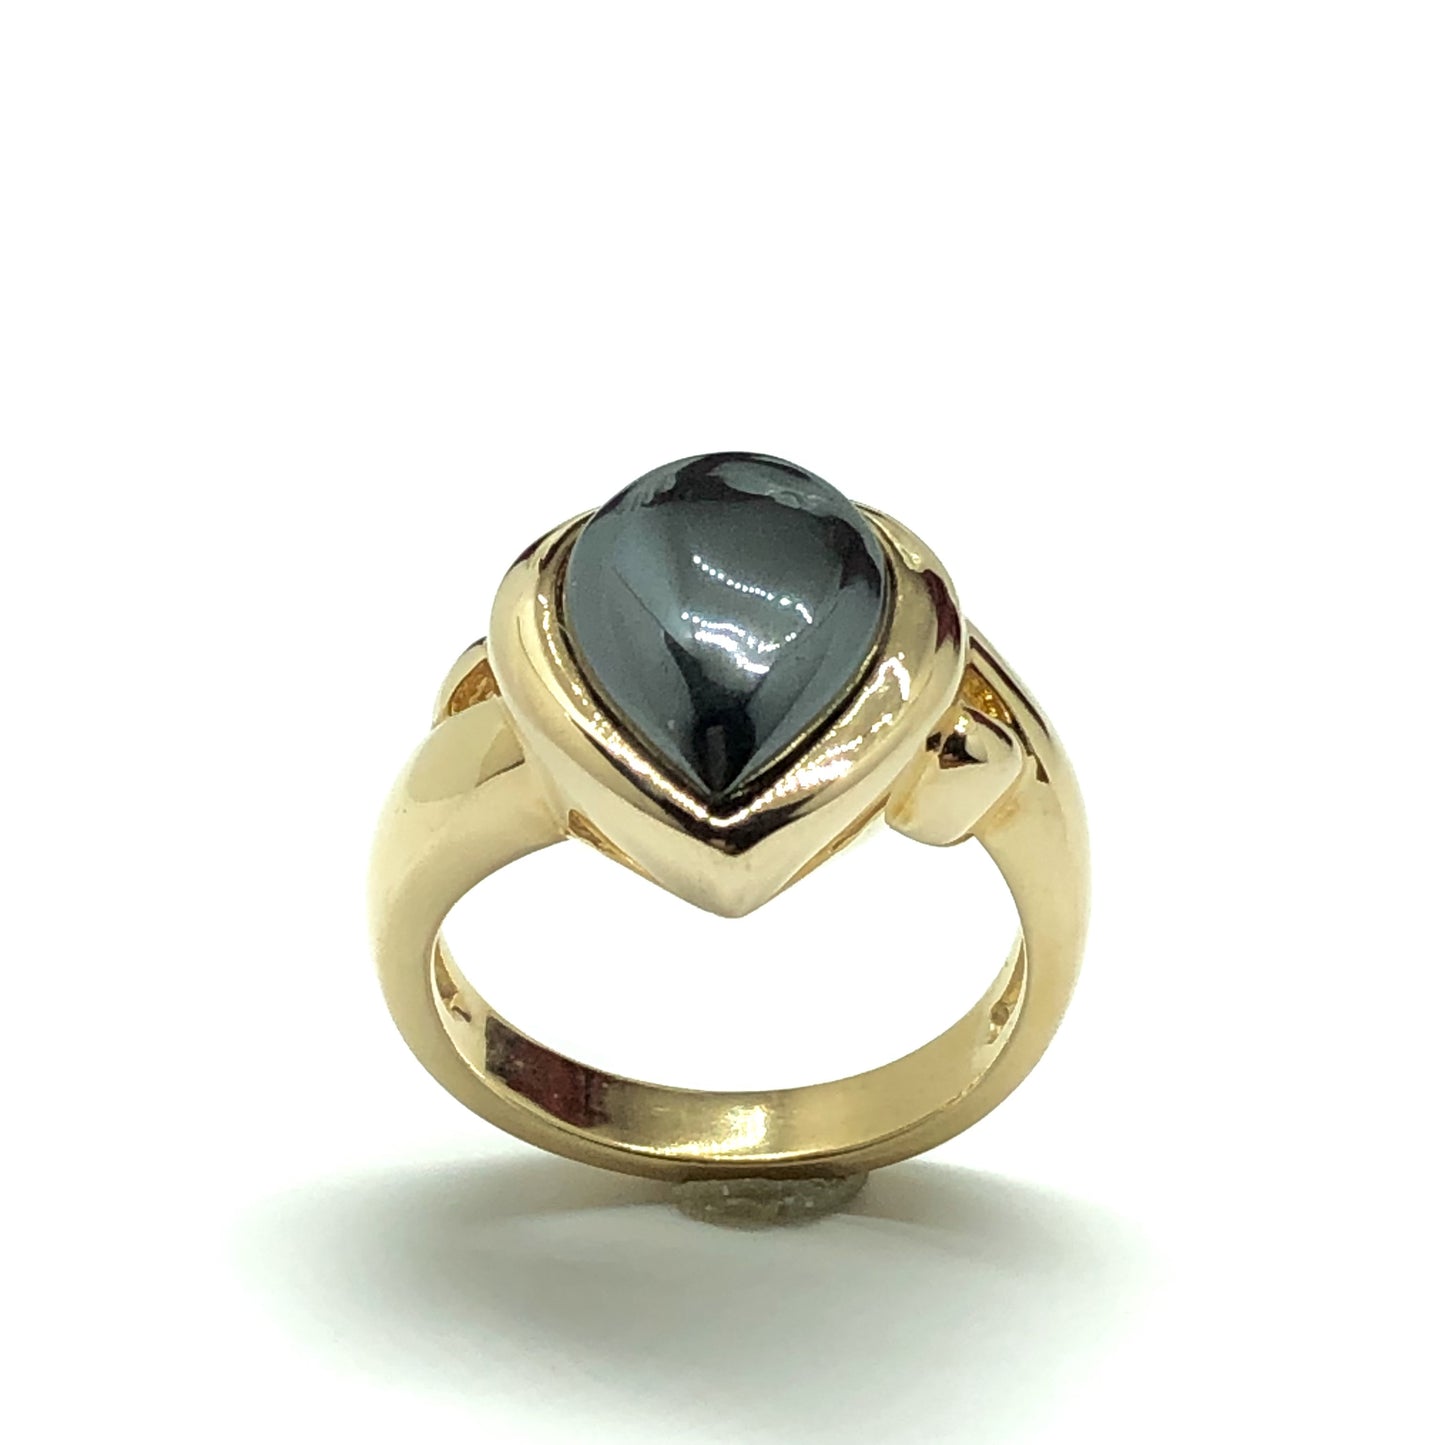 Estate Jewelry - Yellow Gold Sterling Silver Bold Hematite Stone Band Ring